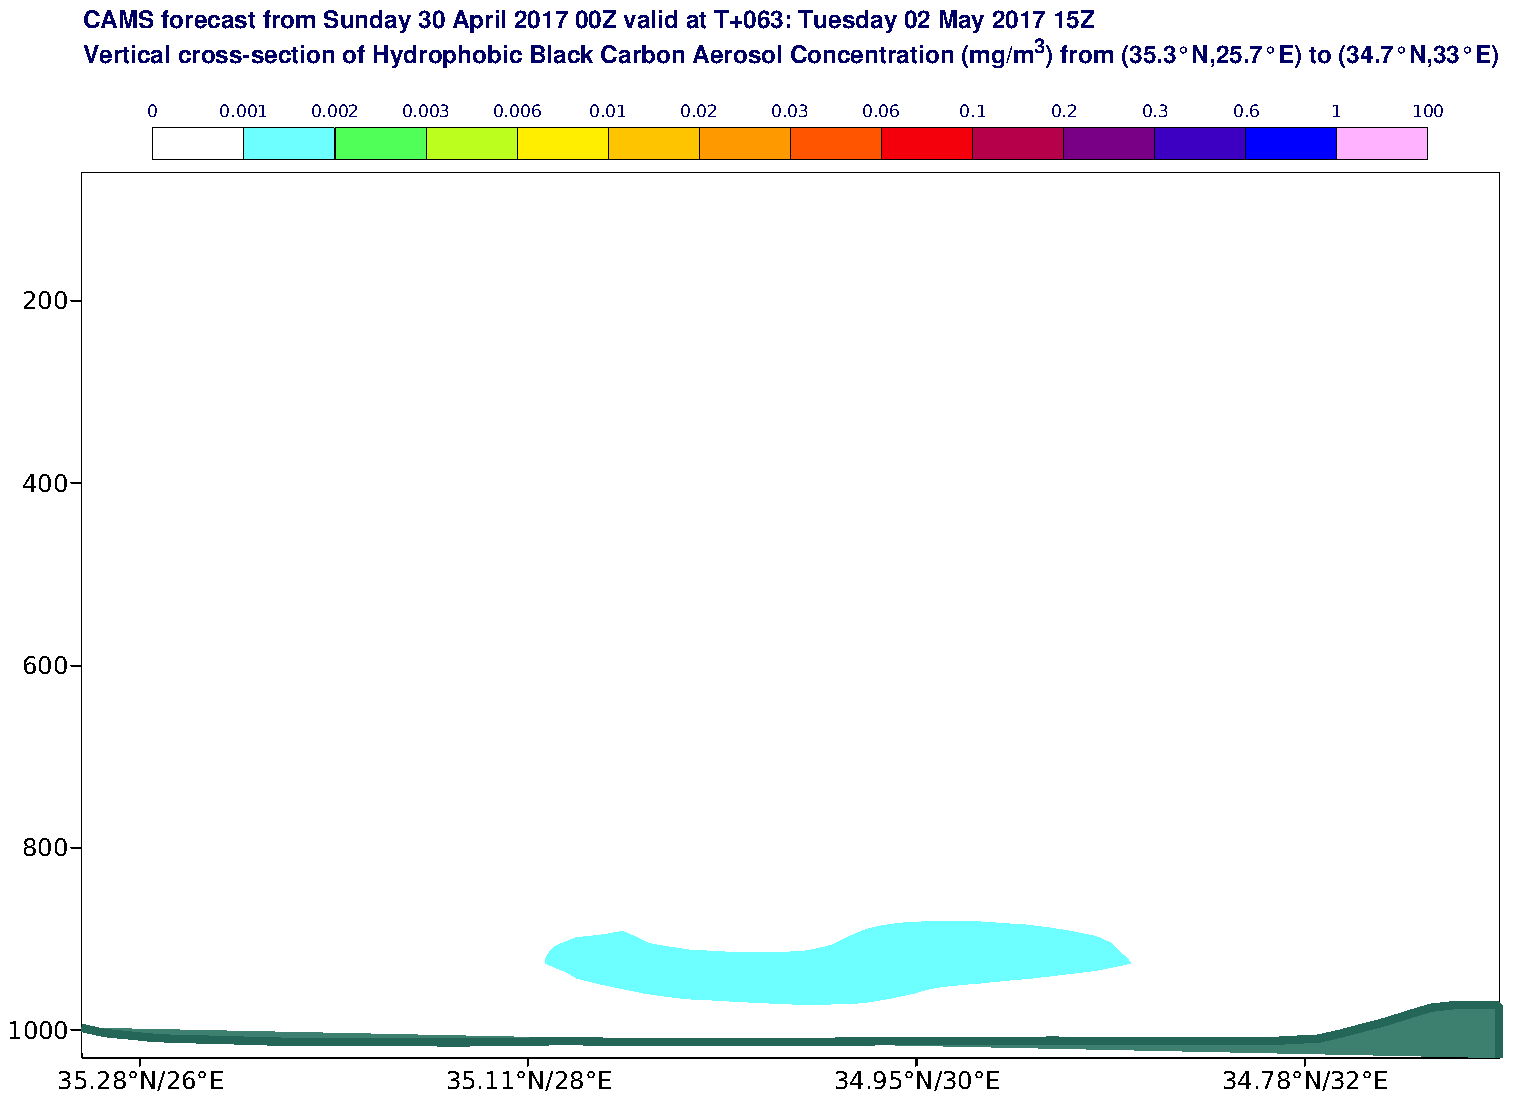 Vertical cross-section of Hydrophobic Black Carbon Aerosol Concentration (mg/m3) valid at T63 - 2017-05-02 15:00